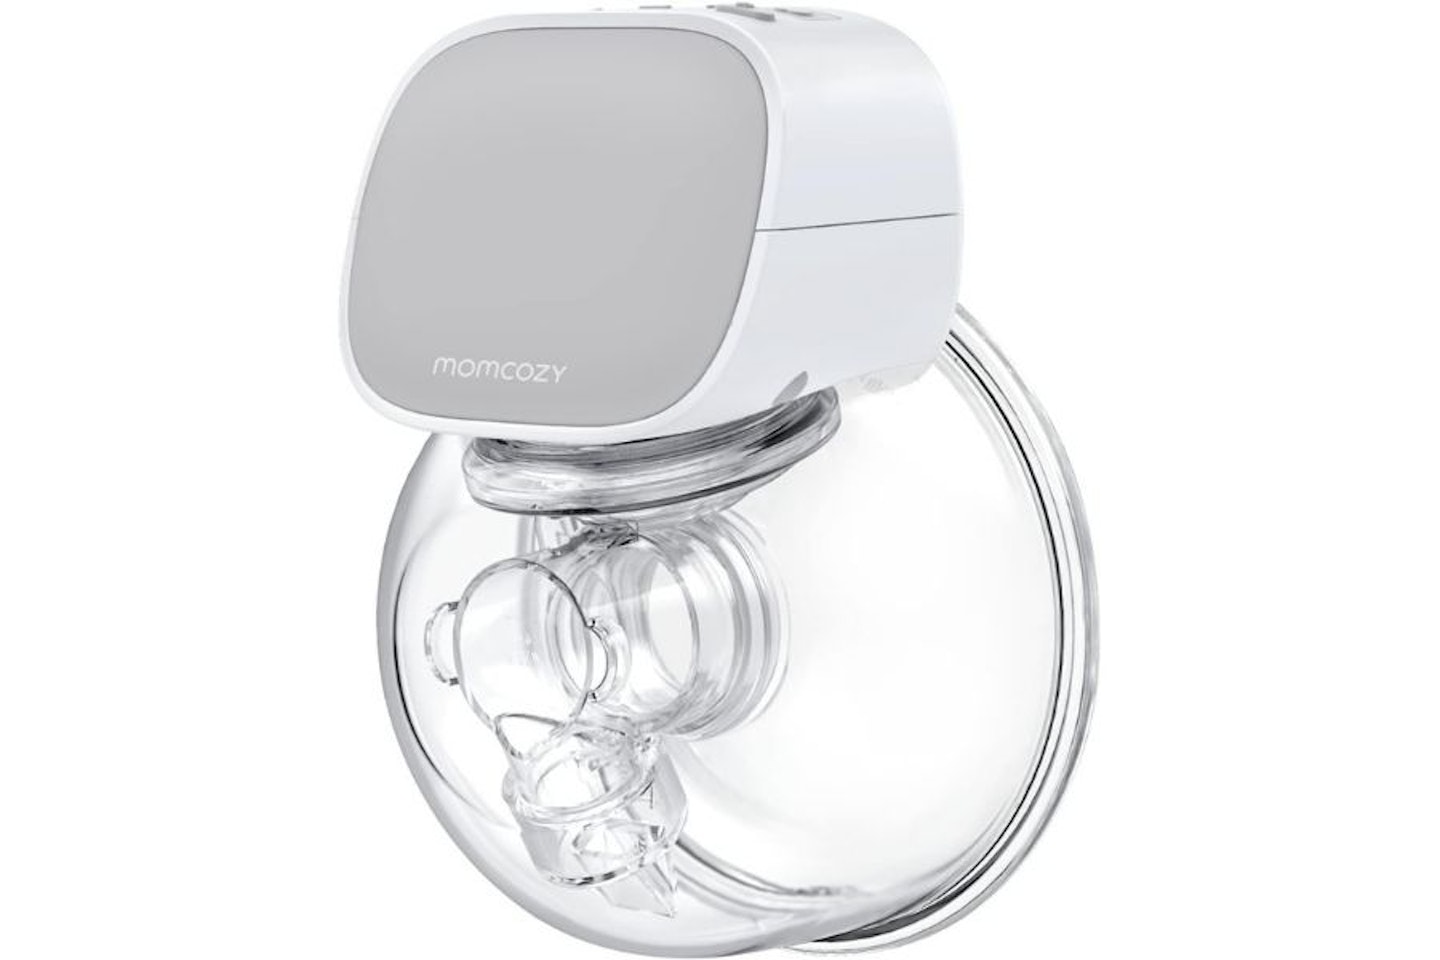 Product Review: Momcozy M5 Breast Pump 